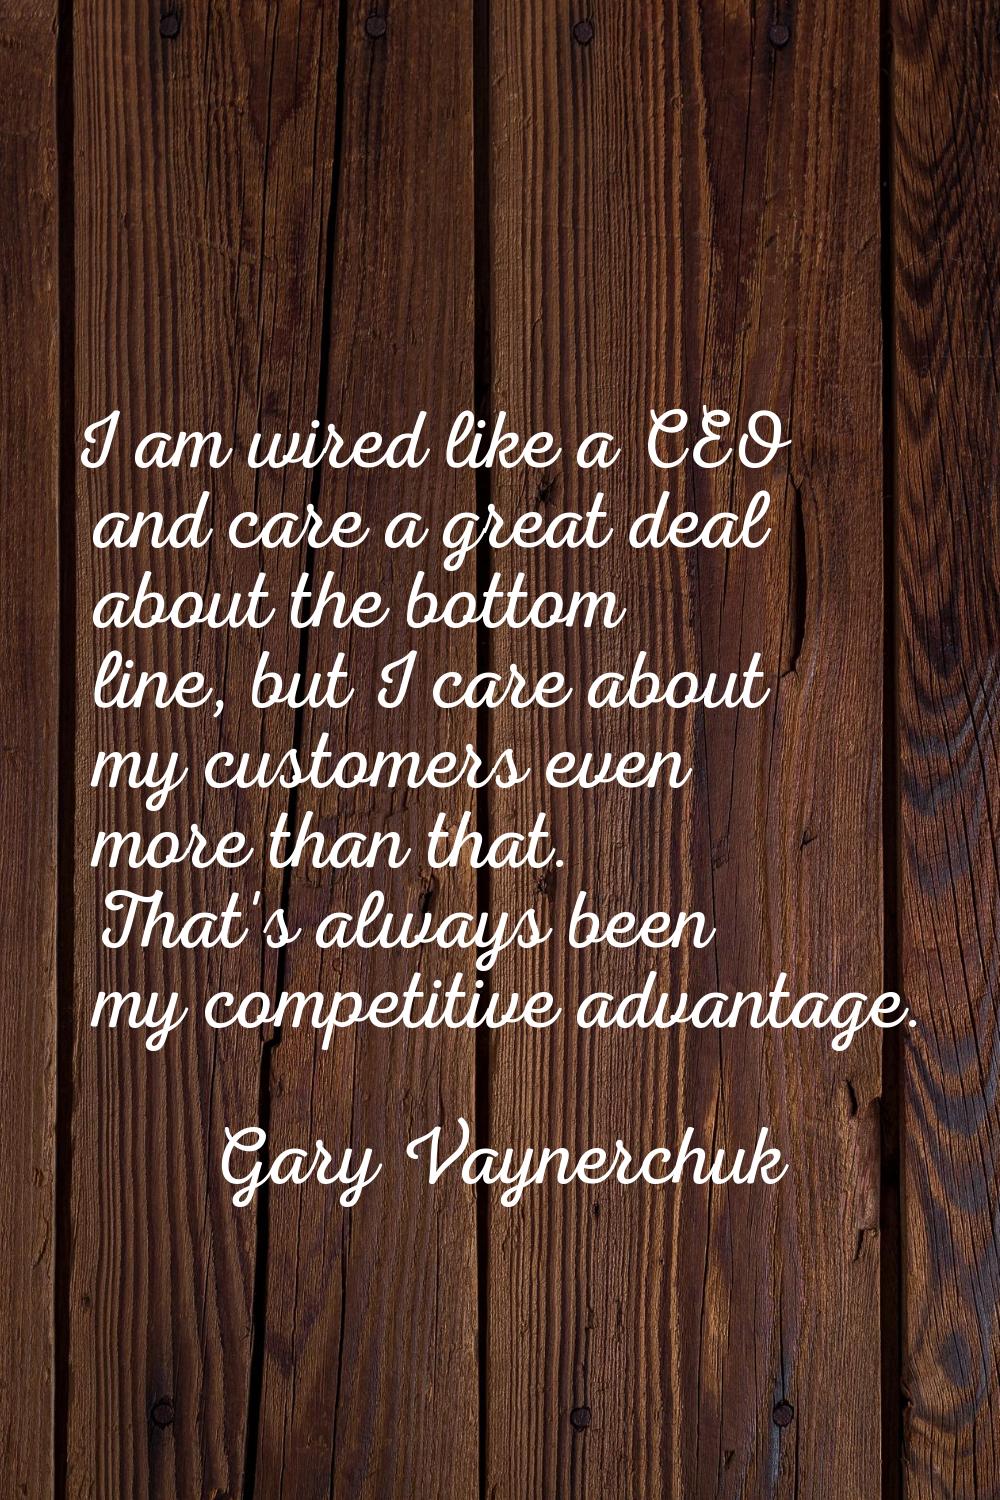 I am wired like a CEO and care a great deal about the bottom line, but I care about my customers ev